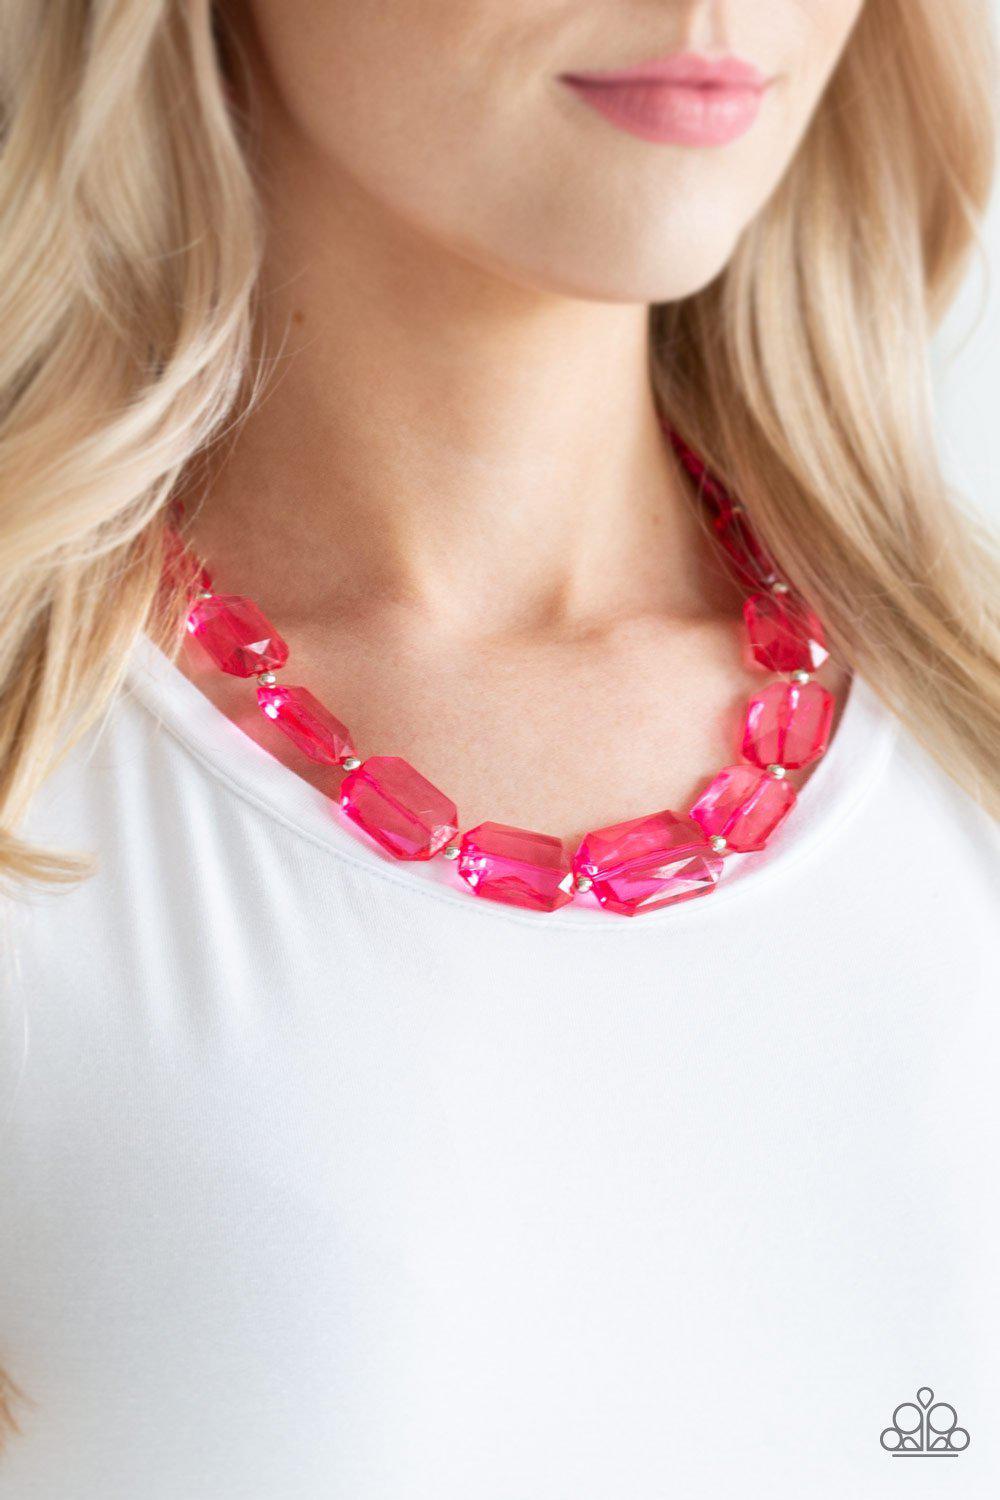 ICE Versa Pink Acrylic Necklace and matching Earrings - Paparazzi Accessories-CarasShop.com - $5 Jewelry by Cara Jewels